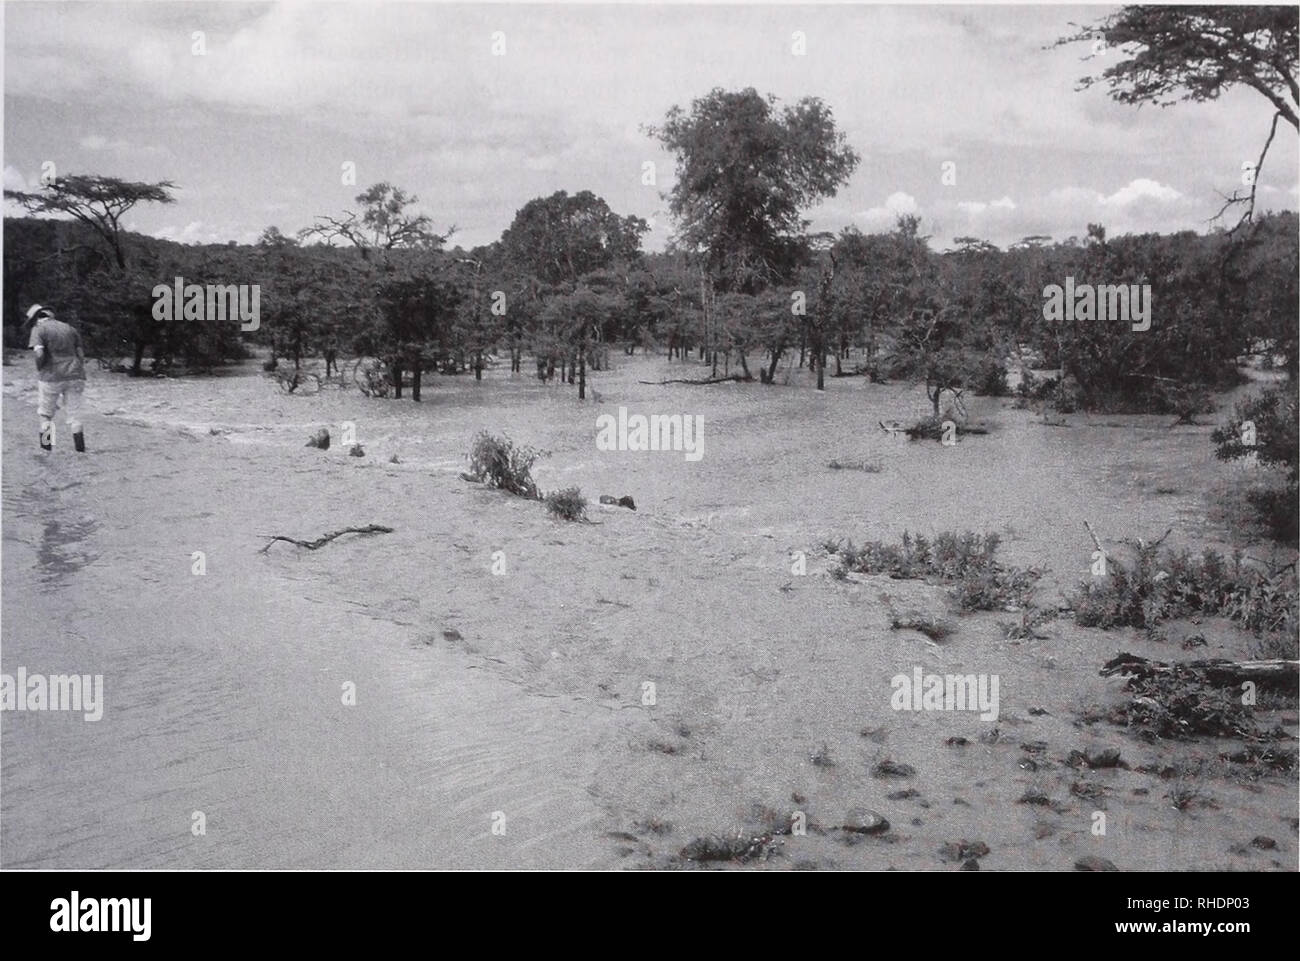 . Bonner zoologische Monographien. Zoology. SHORT  HORM.  II l NA Ol AN I Tl AND S1ASONAI WOODLAND IN Kl.NYA. FIG. 3. The acacia crossing in flood 10 May 1985. Hörne is at left, on the road that connects GMF with Center. Note the muddy water; woodland is of Acacia gerrardii, with Euclea spp. This is the site of long-lasting but temporary pond after heavy rains. Photo to NE from S of crossing. trees (thus depriving the soil of their nutrients), spo- radic charcoal-making activities, and the clearing of some places dominated by Tarchonanthus camphora- tus for production of leleshwa oil. Lele Stock Photo